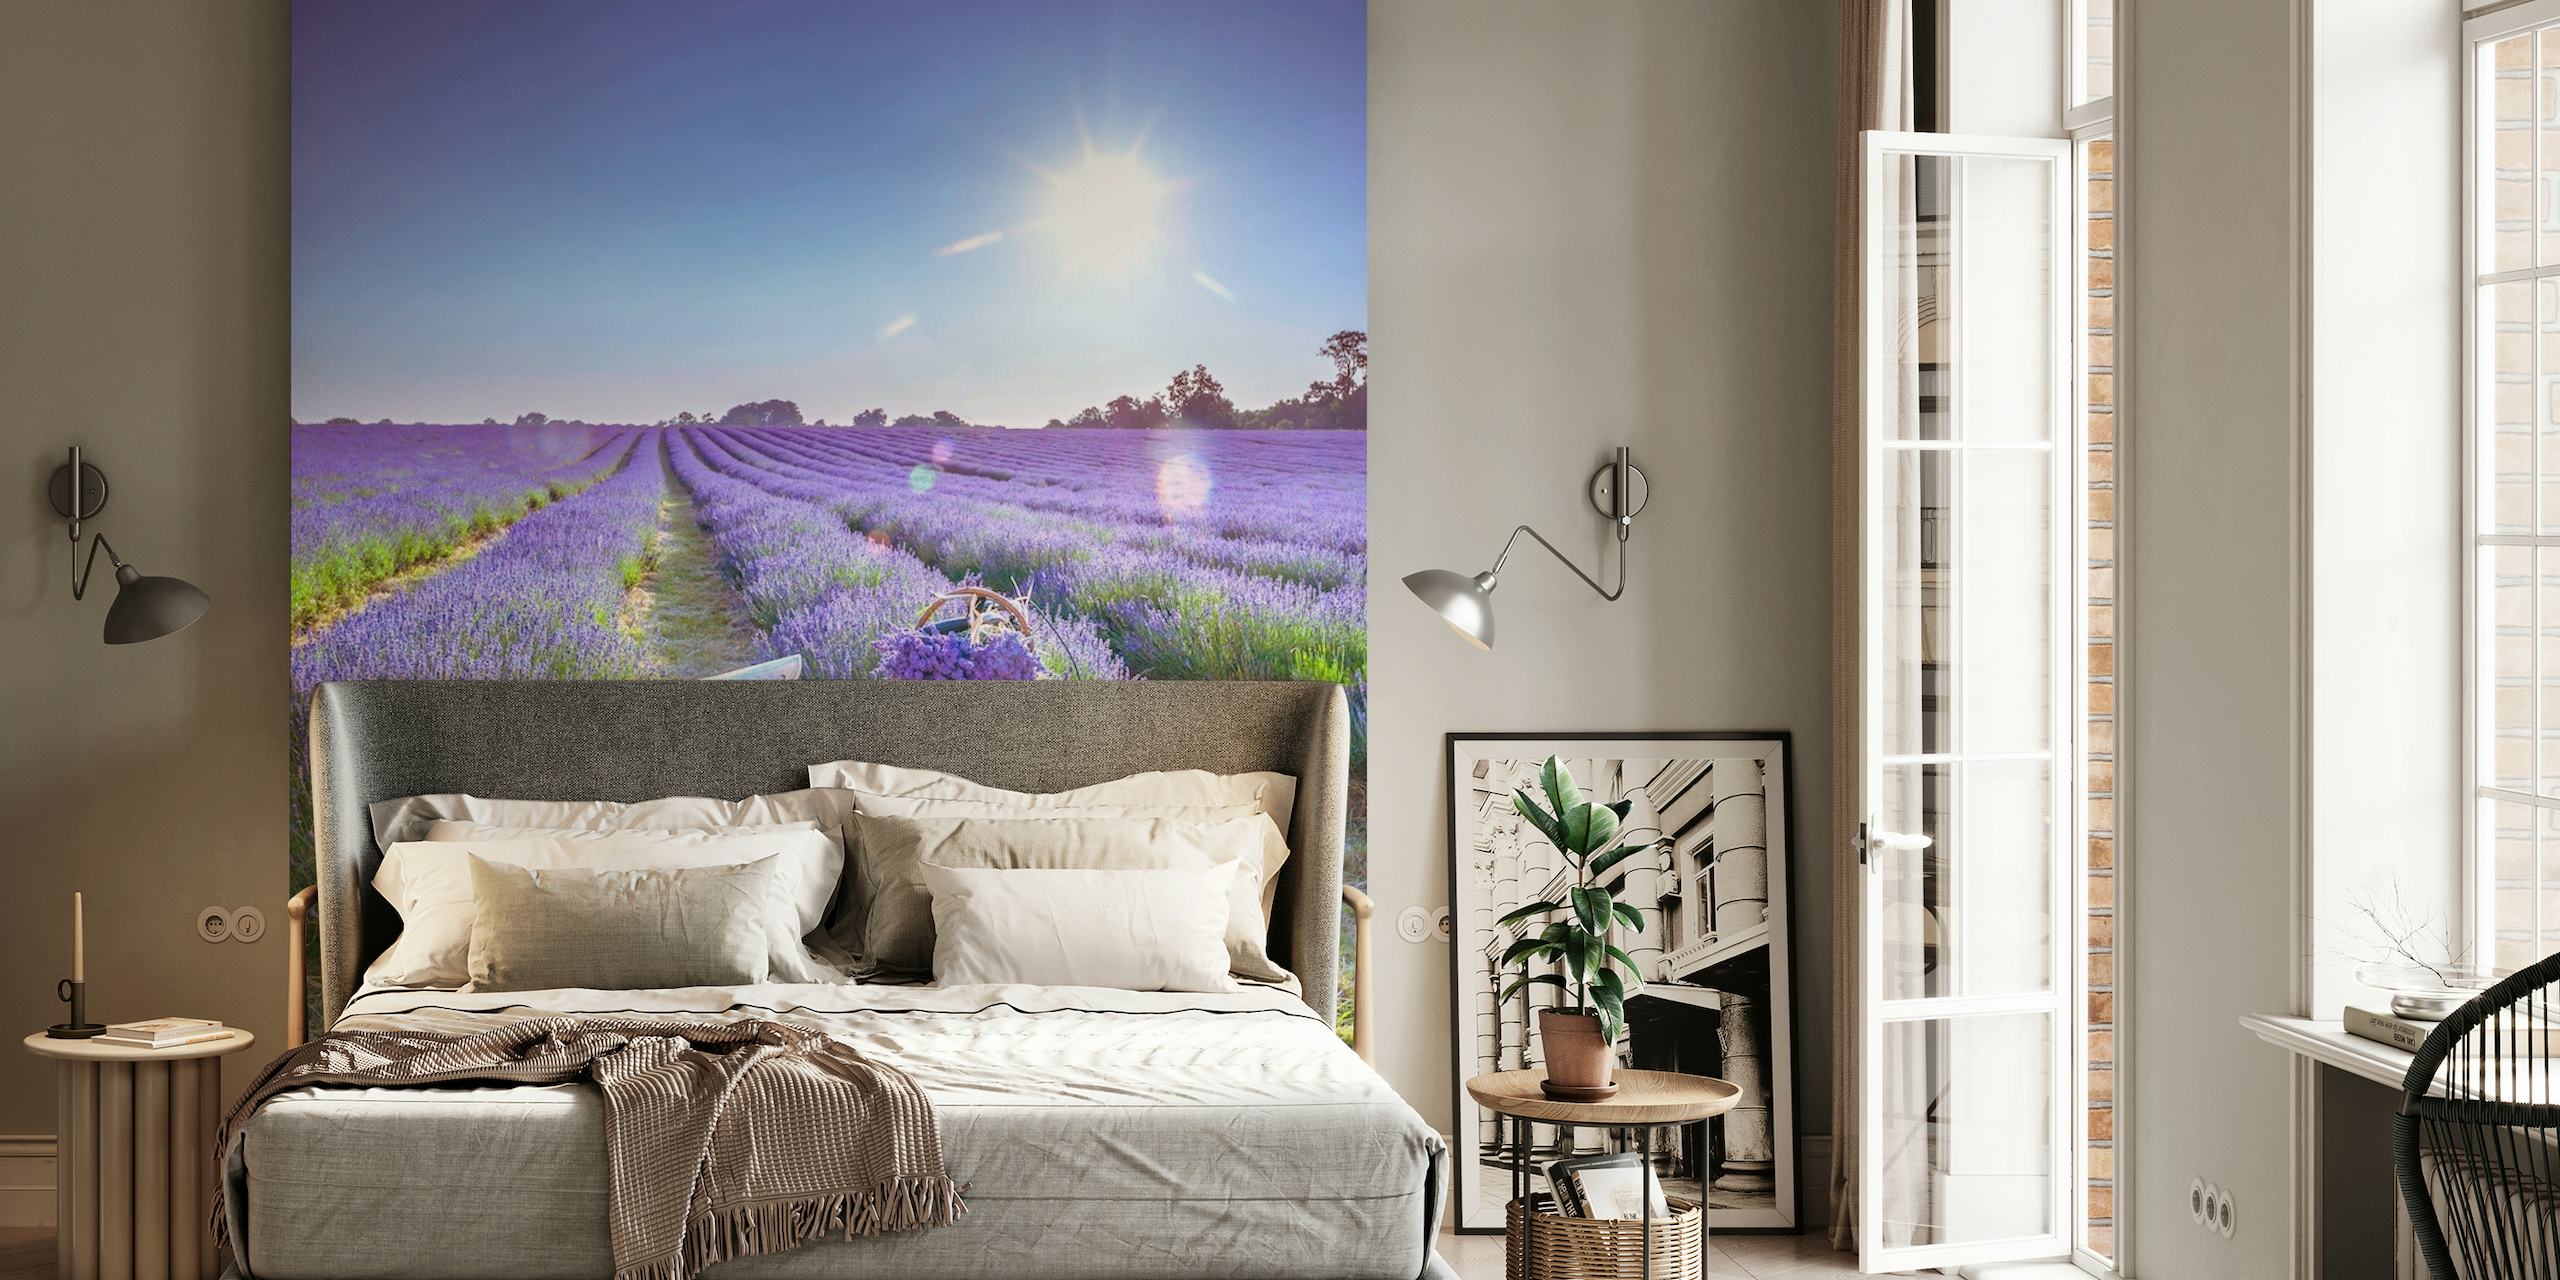 Bicycle with flowers in a Lavender field behang